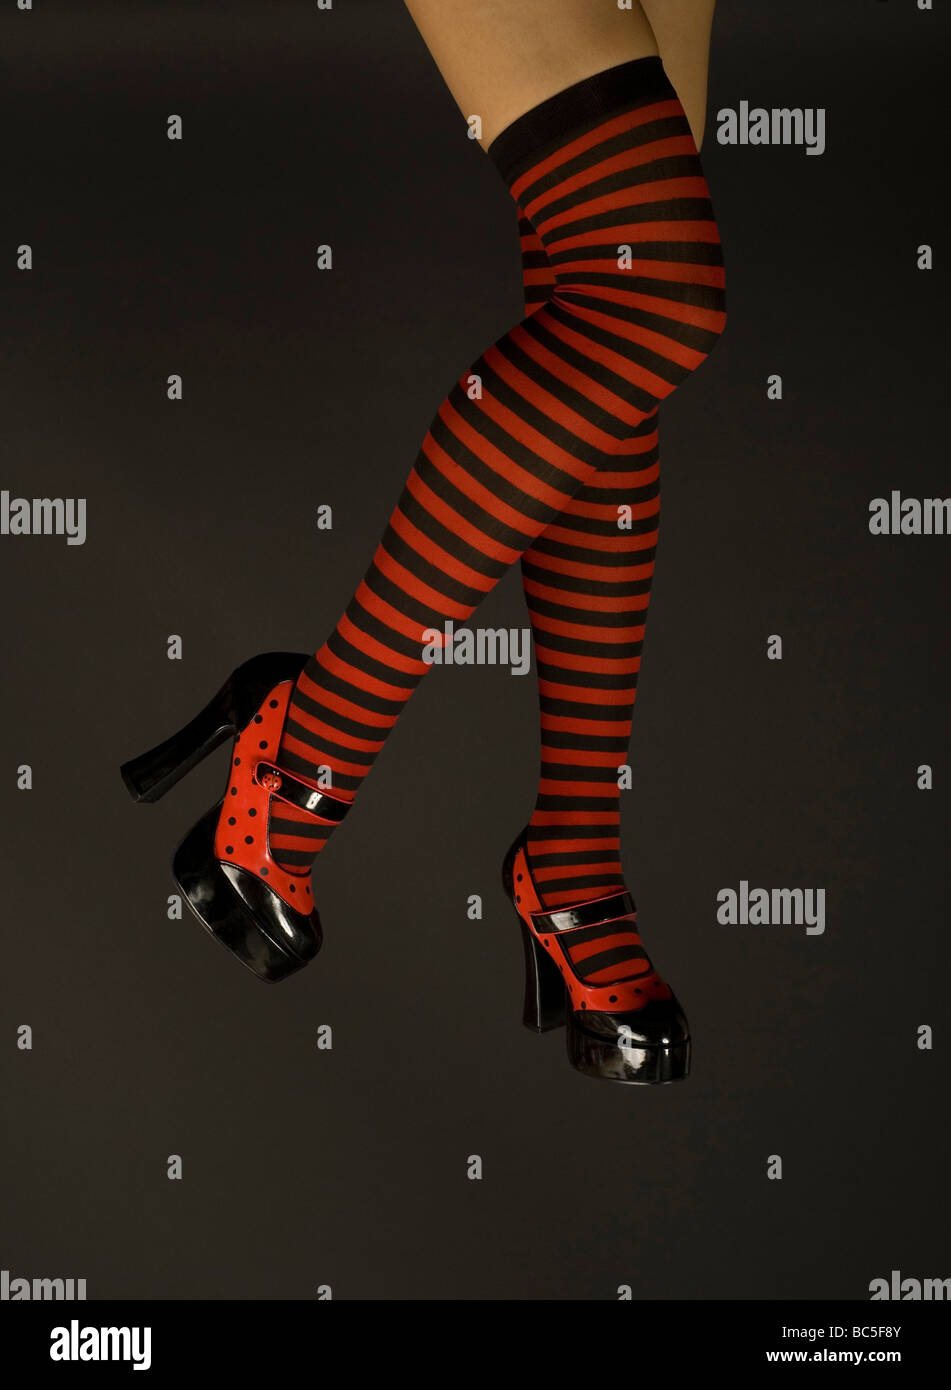 Heels Stockings High Resolution Stock Photography and Images - Alamy